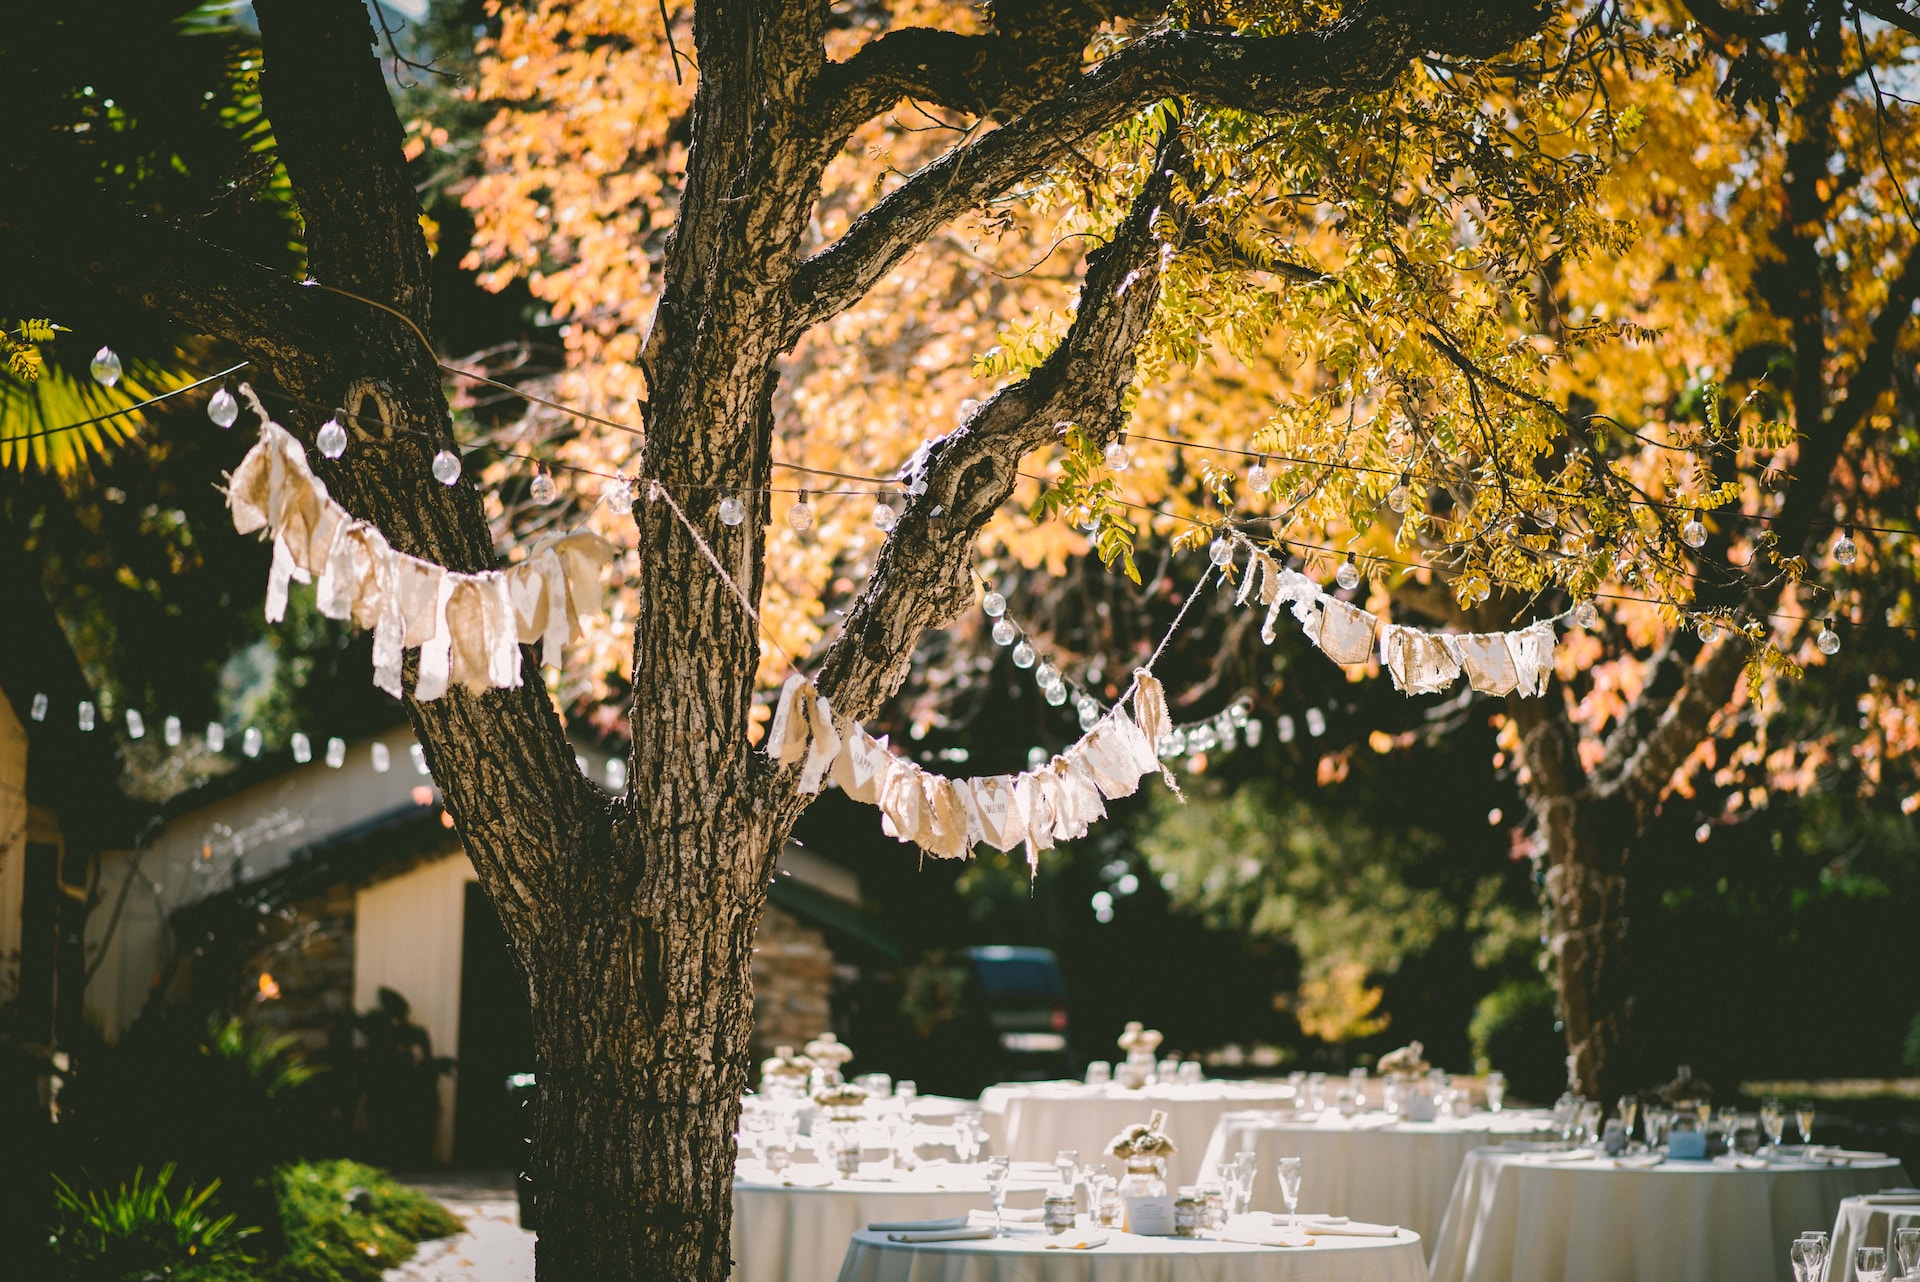 Garden party with formal tables, bunting and fairy lights.